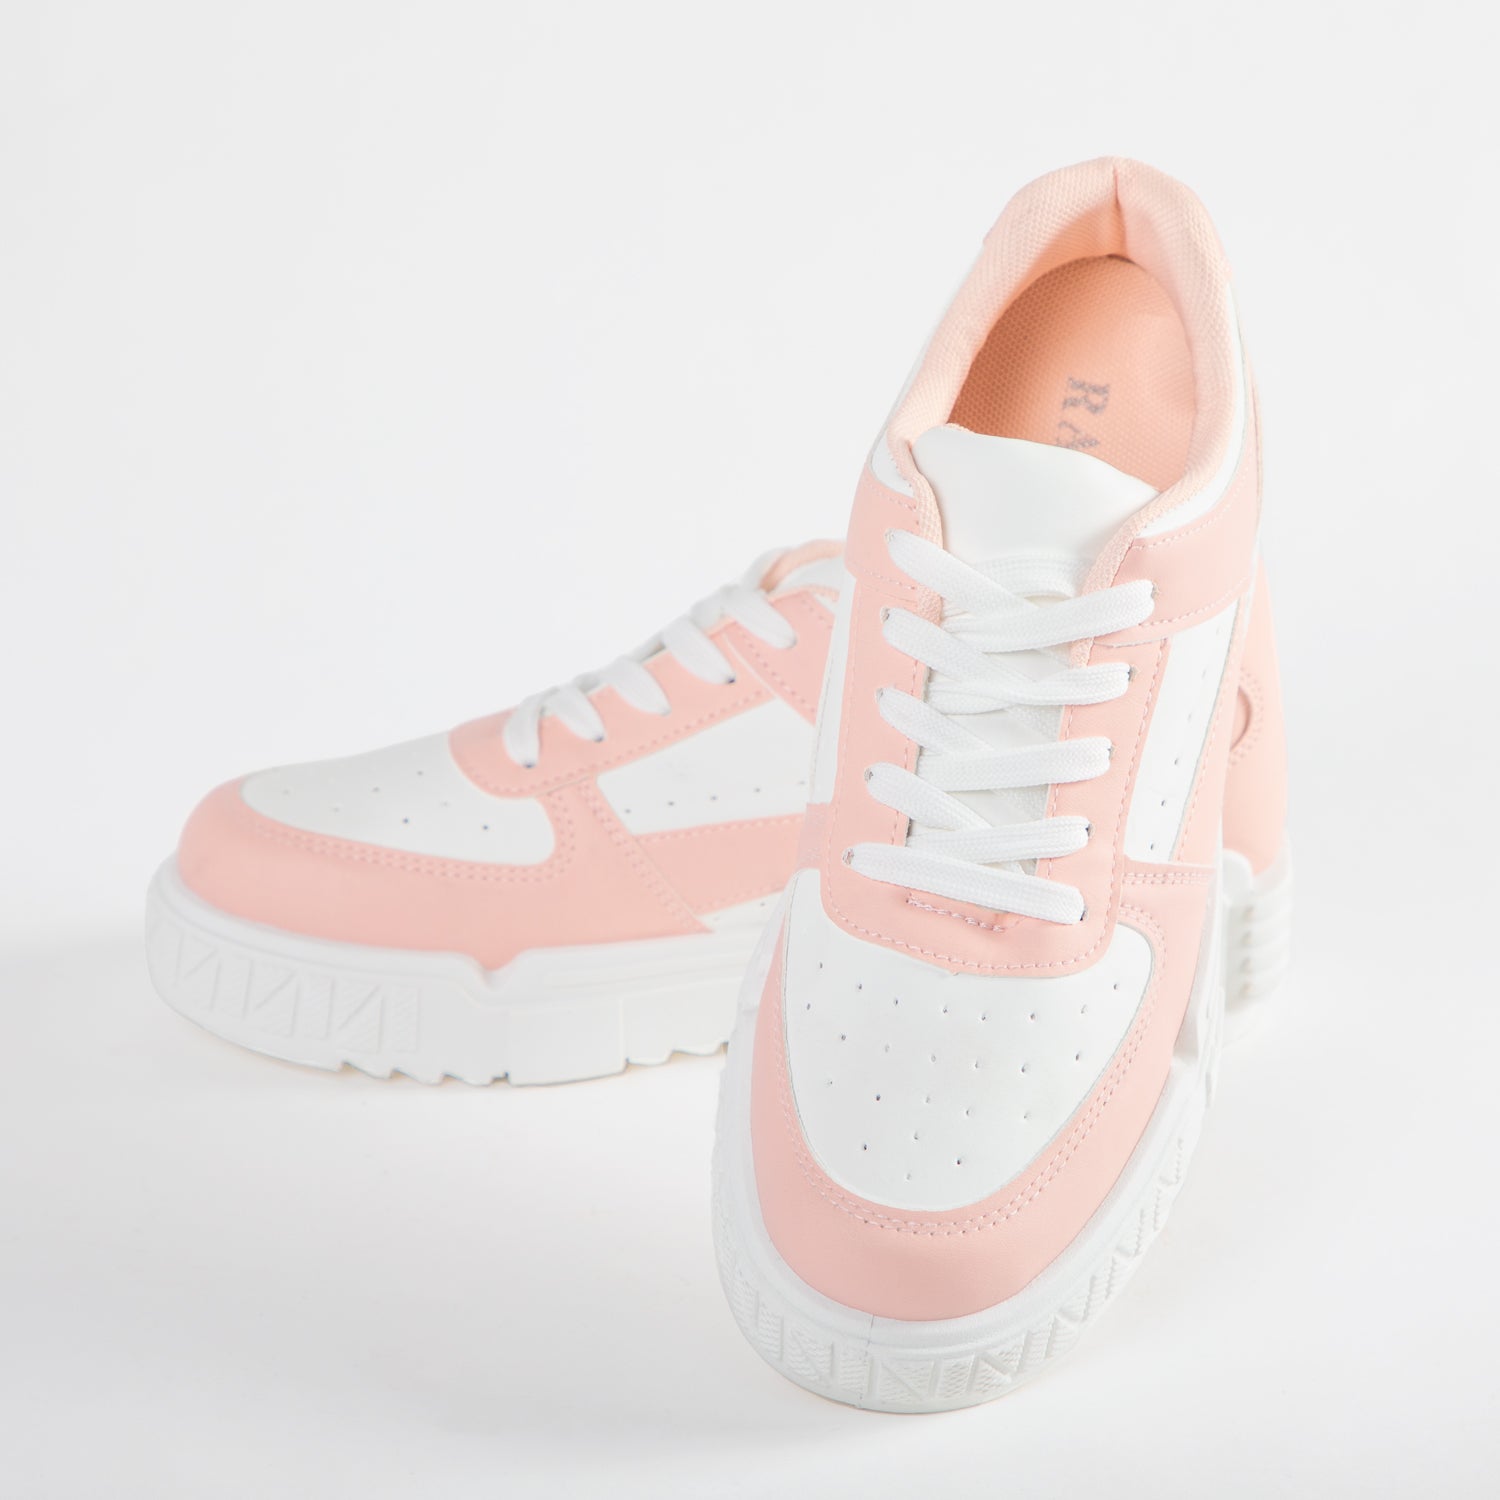 RAID Dexter Chunky Trainer in Pink